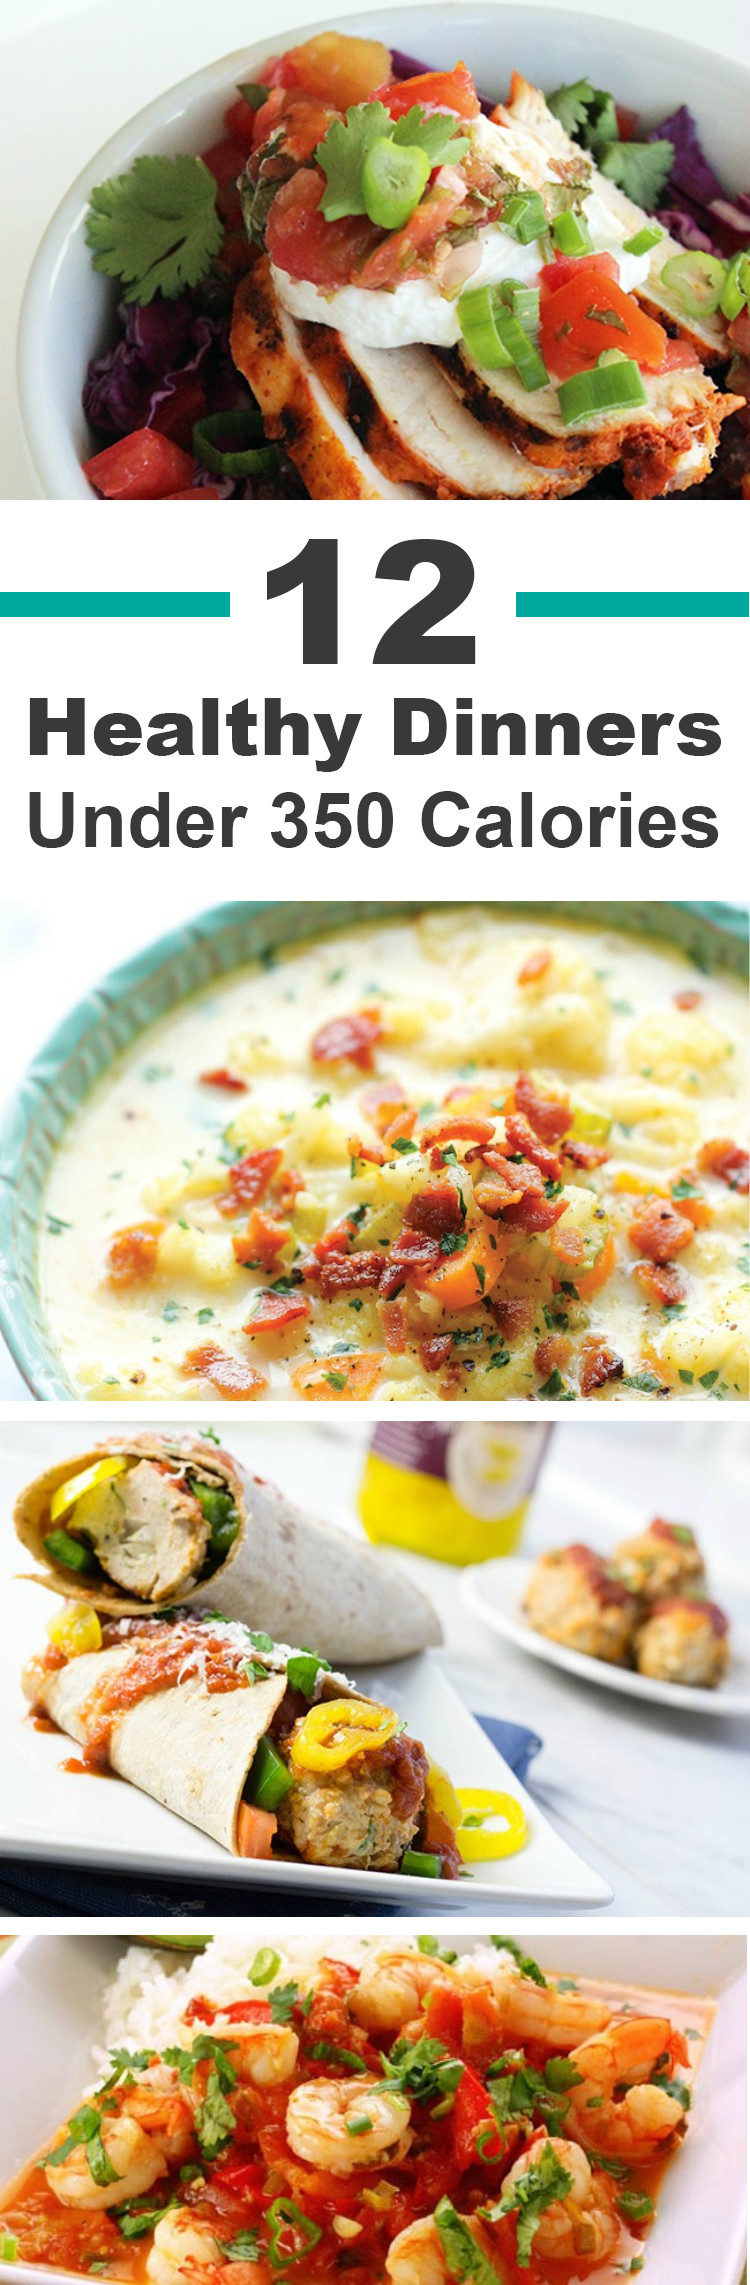 Low Calorie Healthy Dinners
 12 Healthy Dinners Under 350 Calories